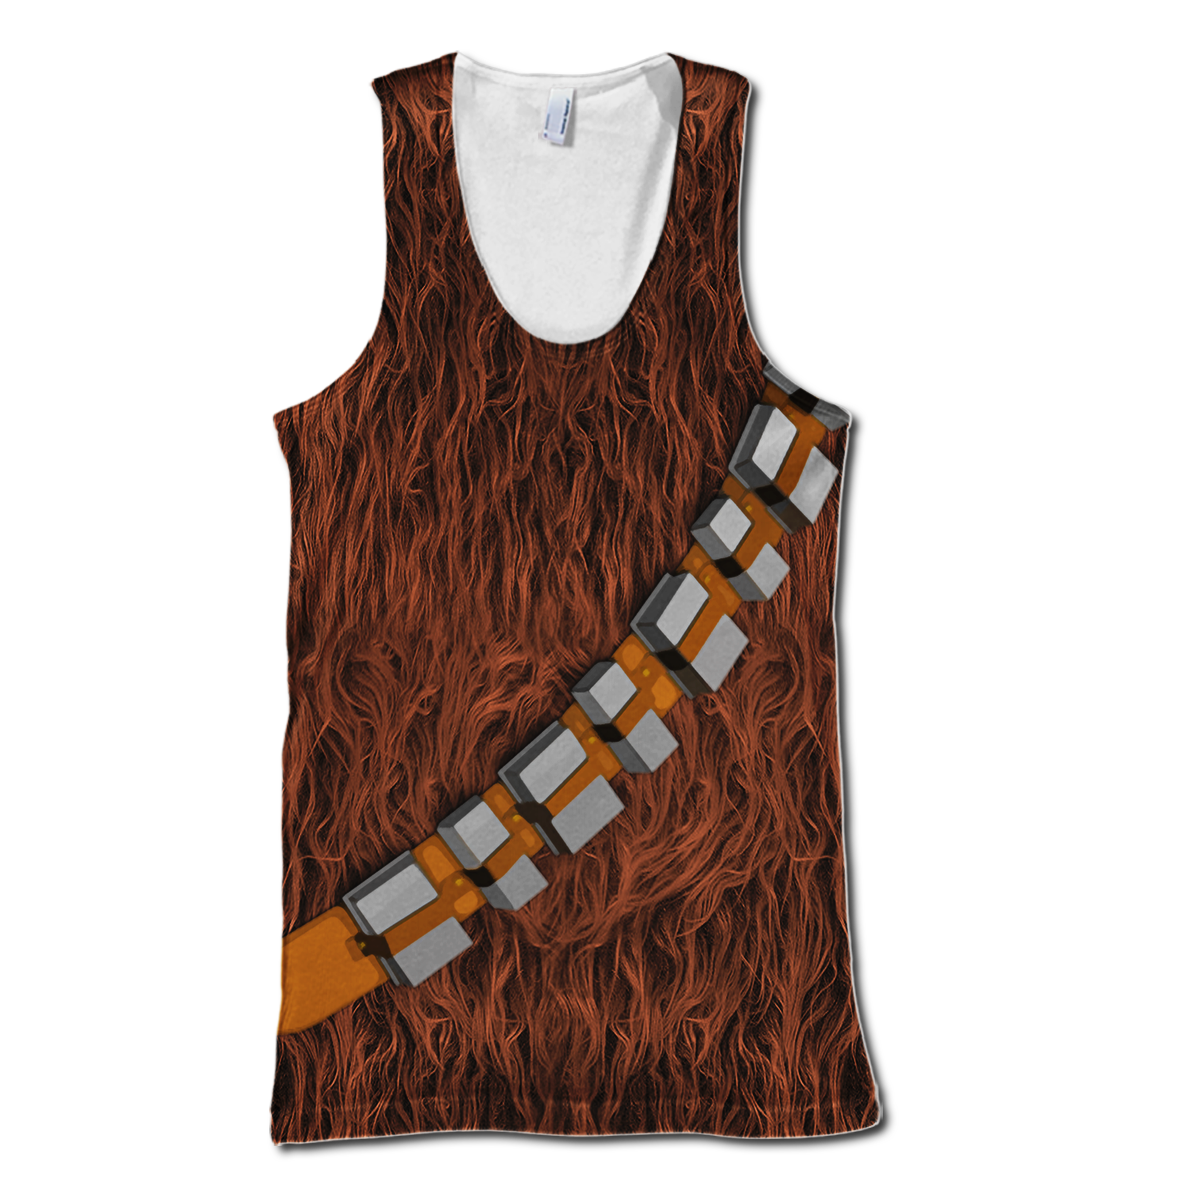 Unifinz SW T-shirt Chewbacca Limited 3D Print Costume T-shirt Amazing SW Hoodie Sweater Tank 2026